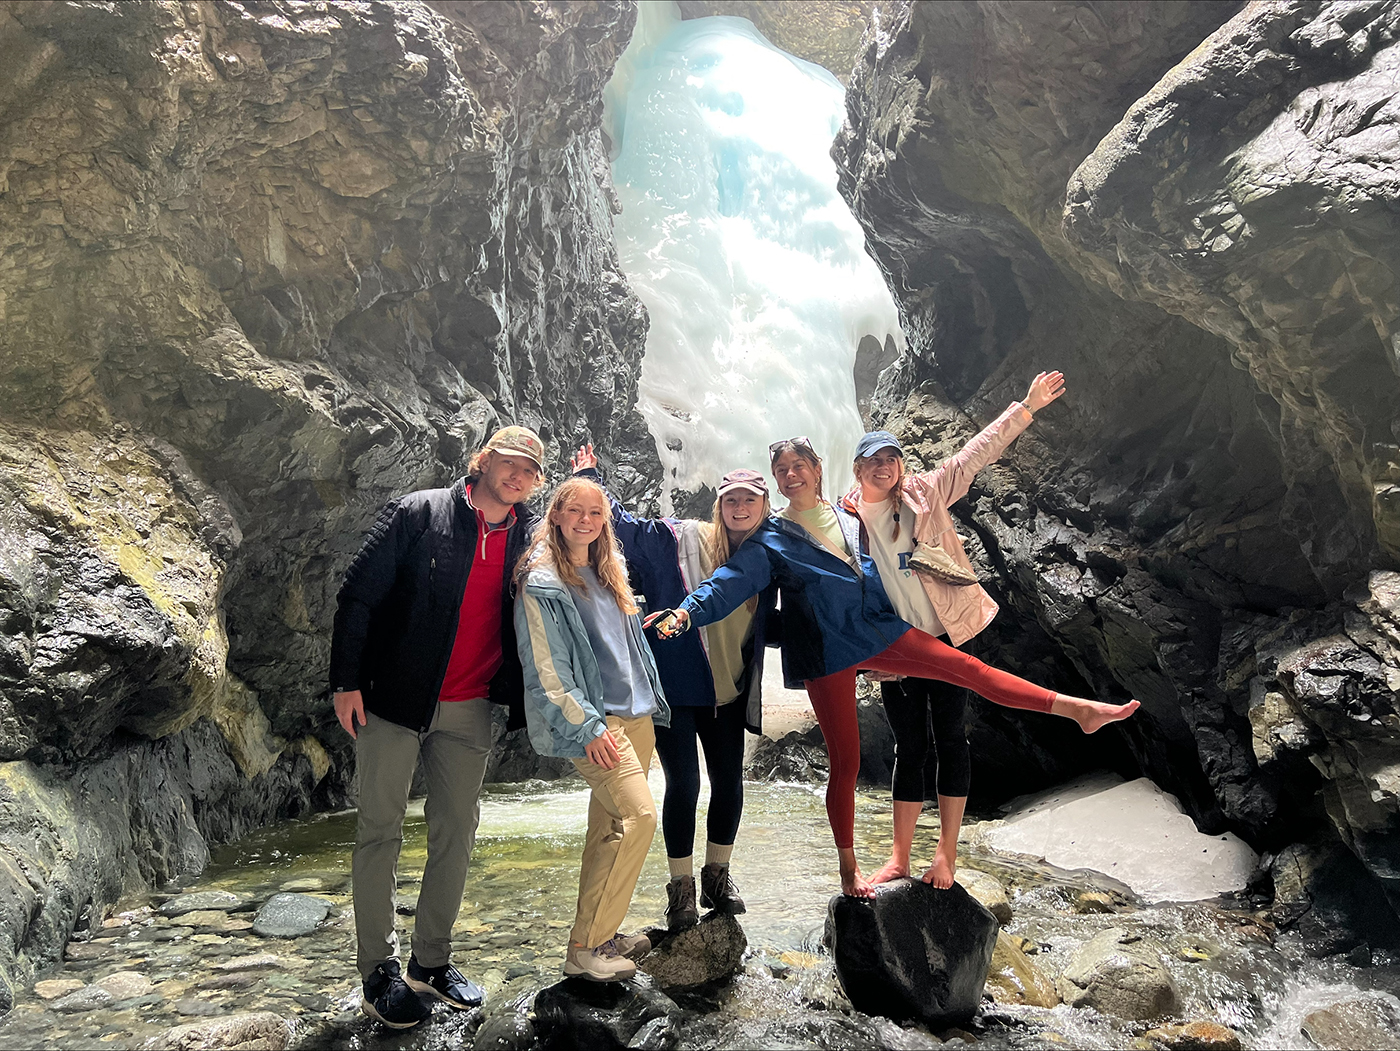 SMU-in-Taos students gather at the base of a frozen waterfall in Taos, NM.